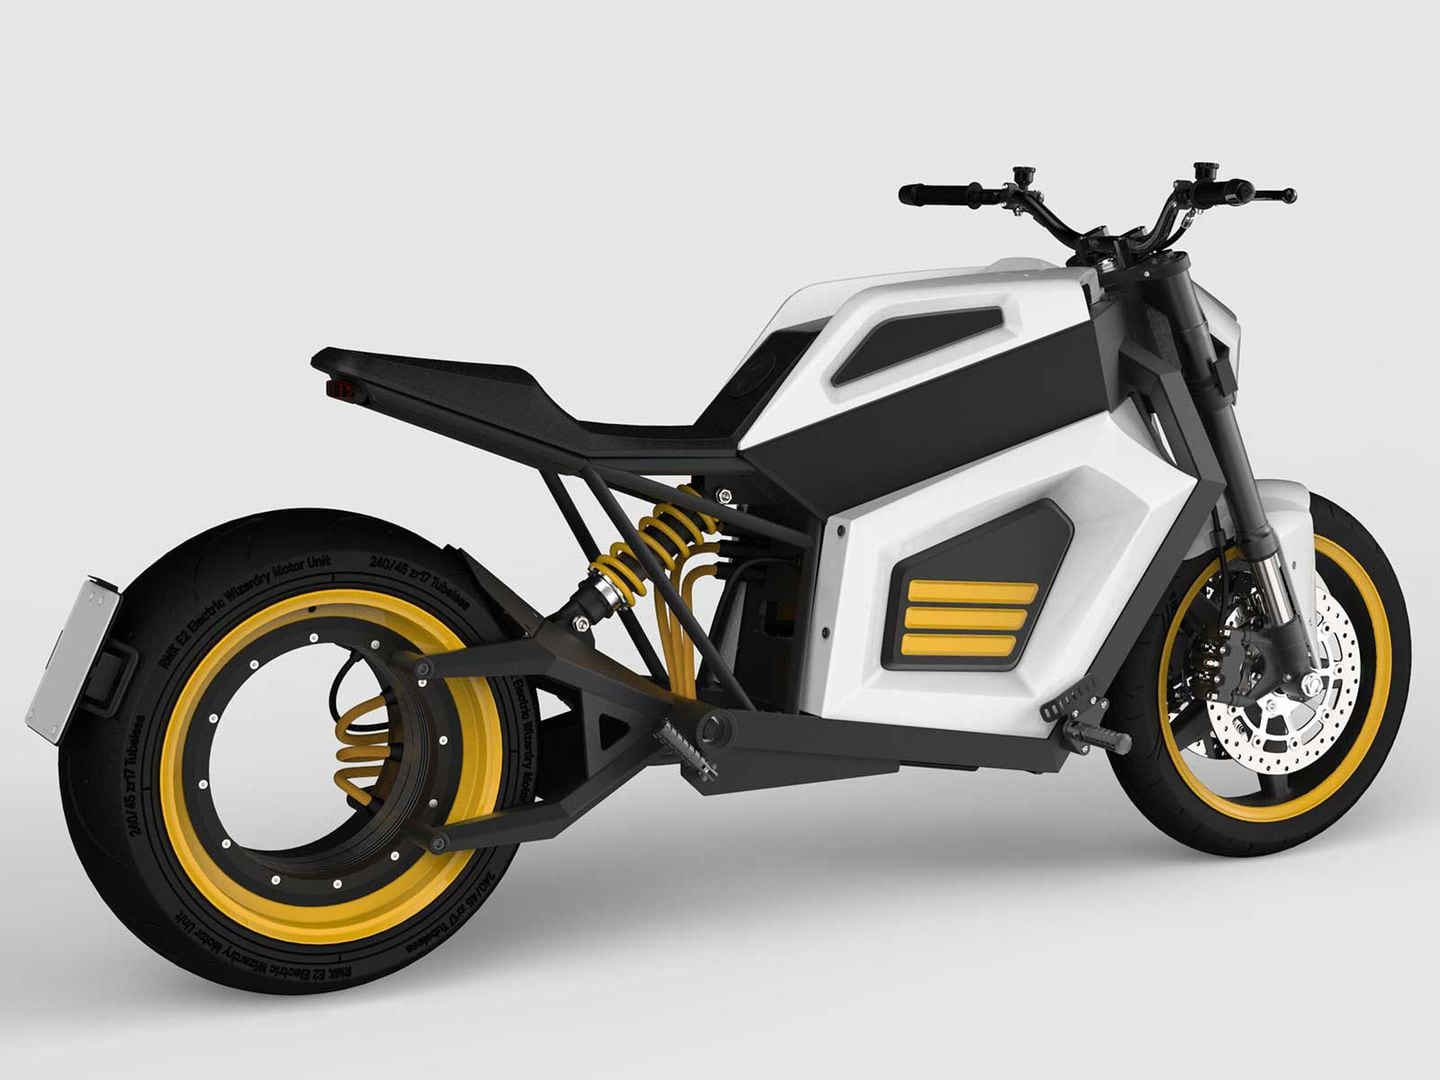 RMK E2 Electric Motorcycle Revealed | Motorcyclist